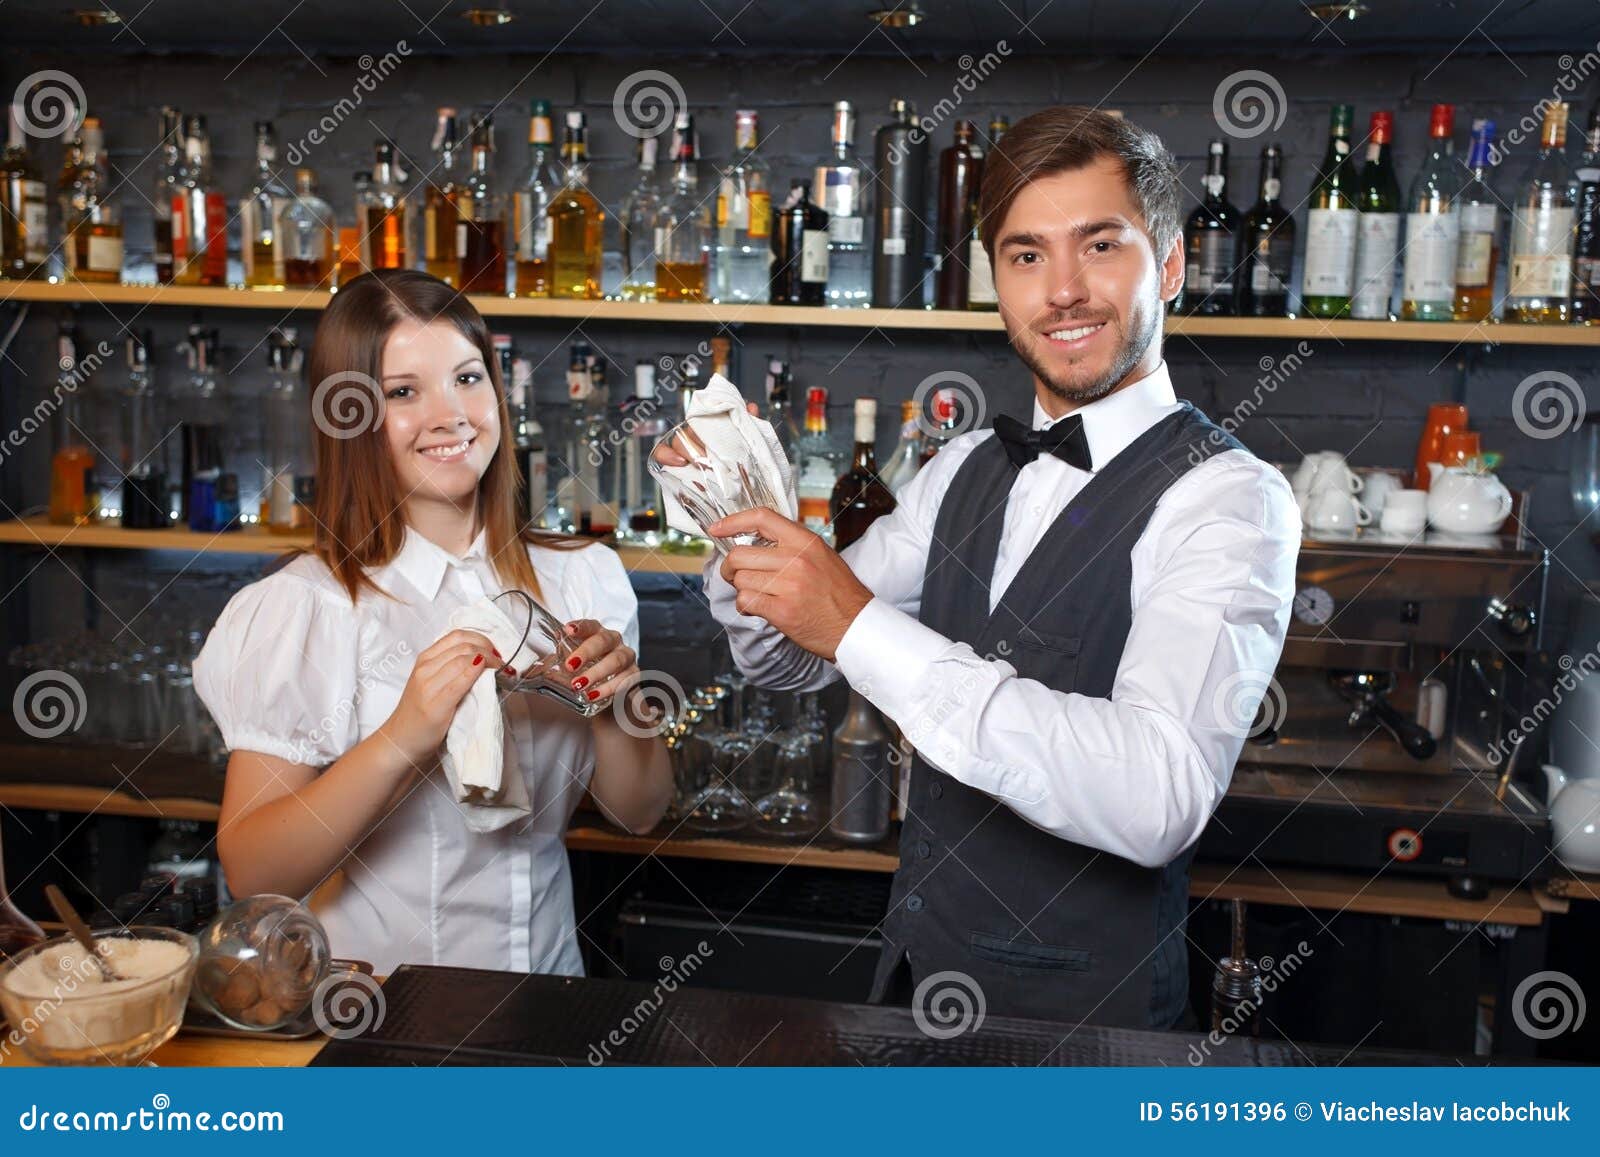 Bar and waitressing jobs in derby